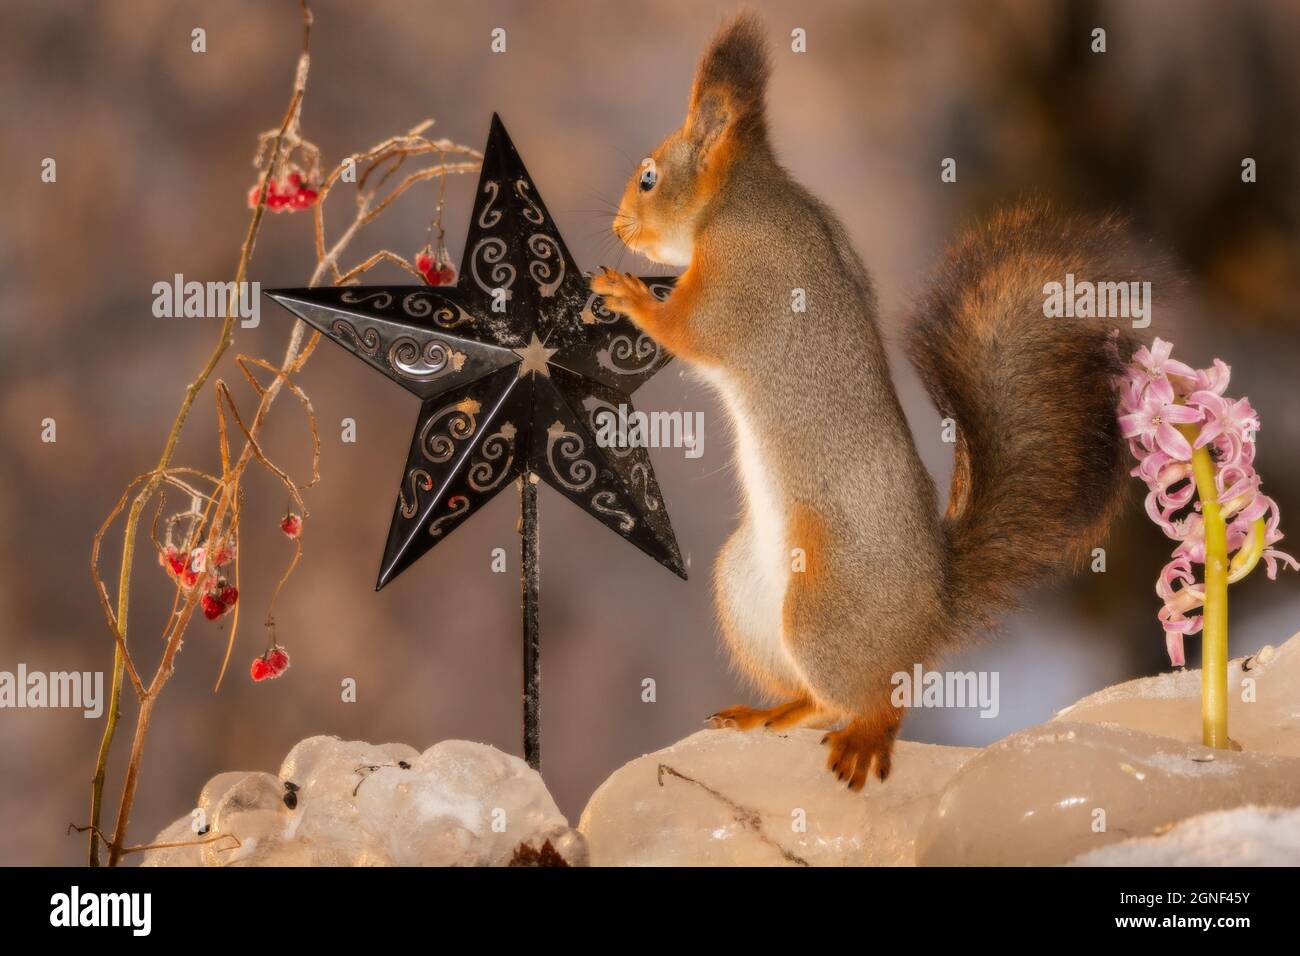 red squirrel standing on ice and touching a star with berries Stock Photo